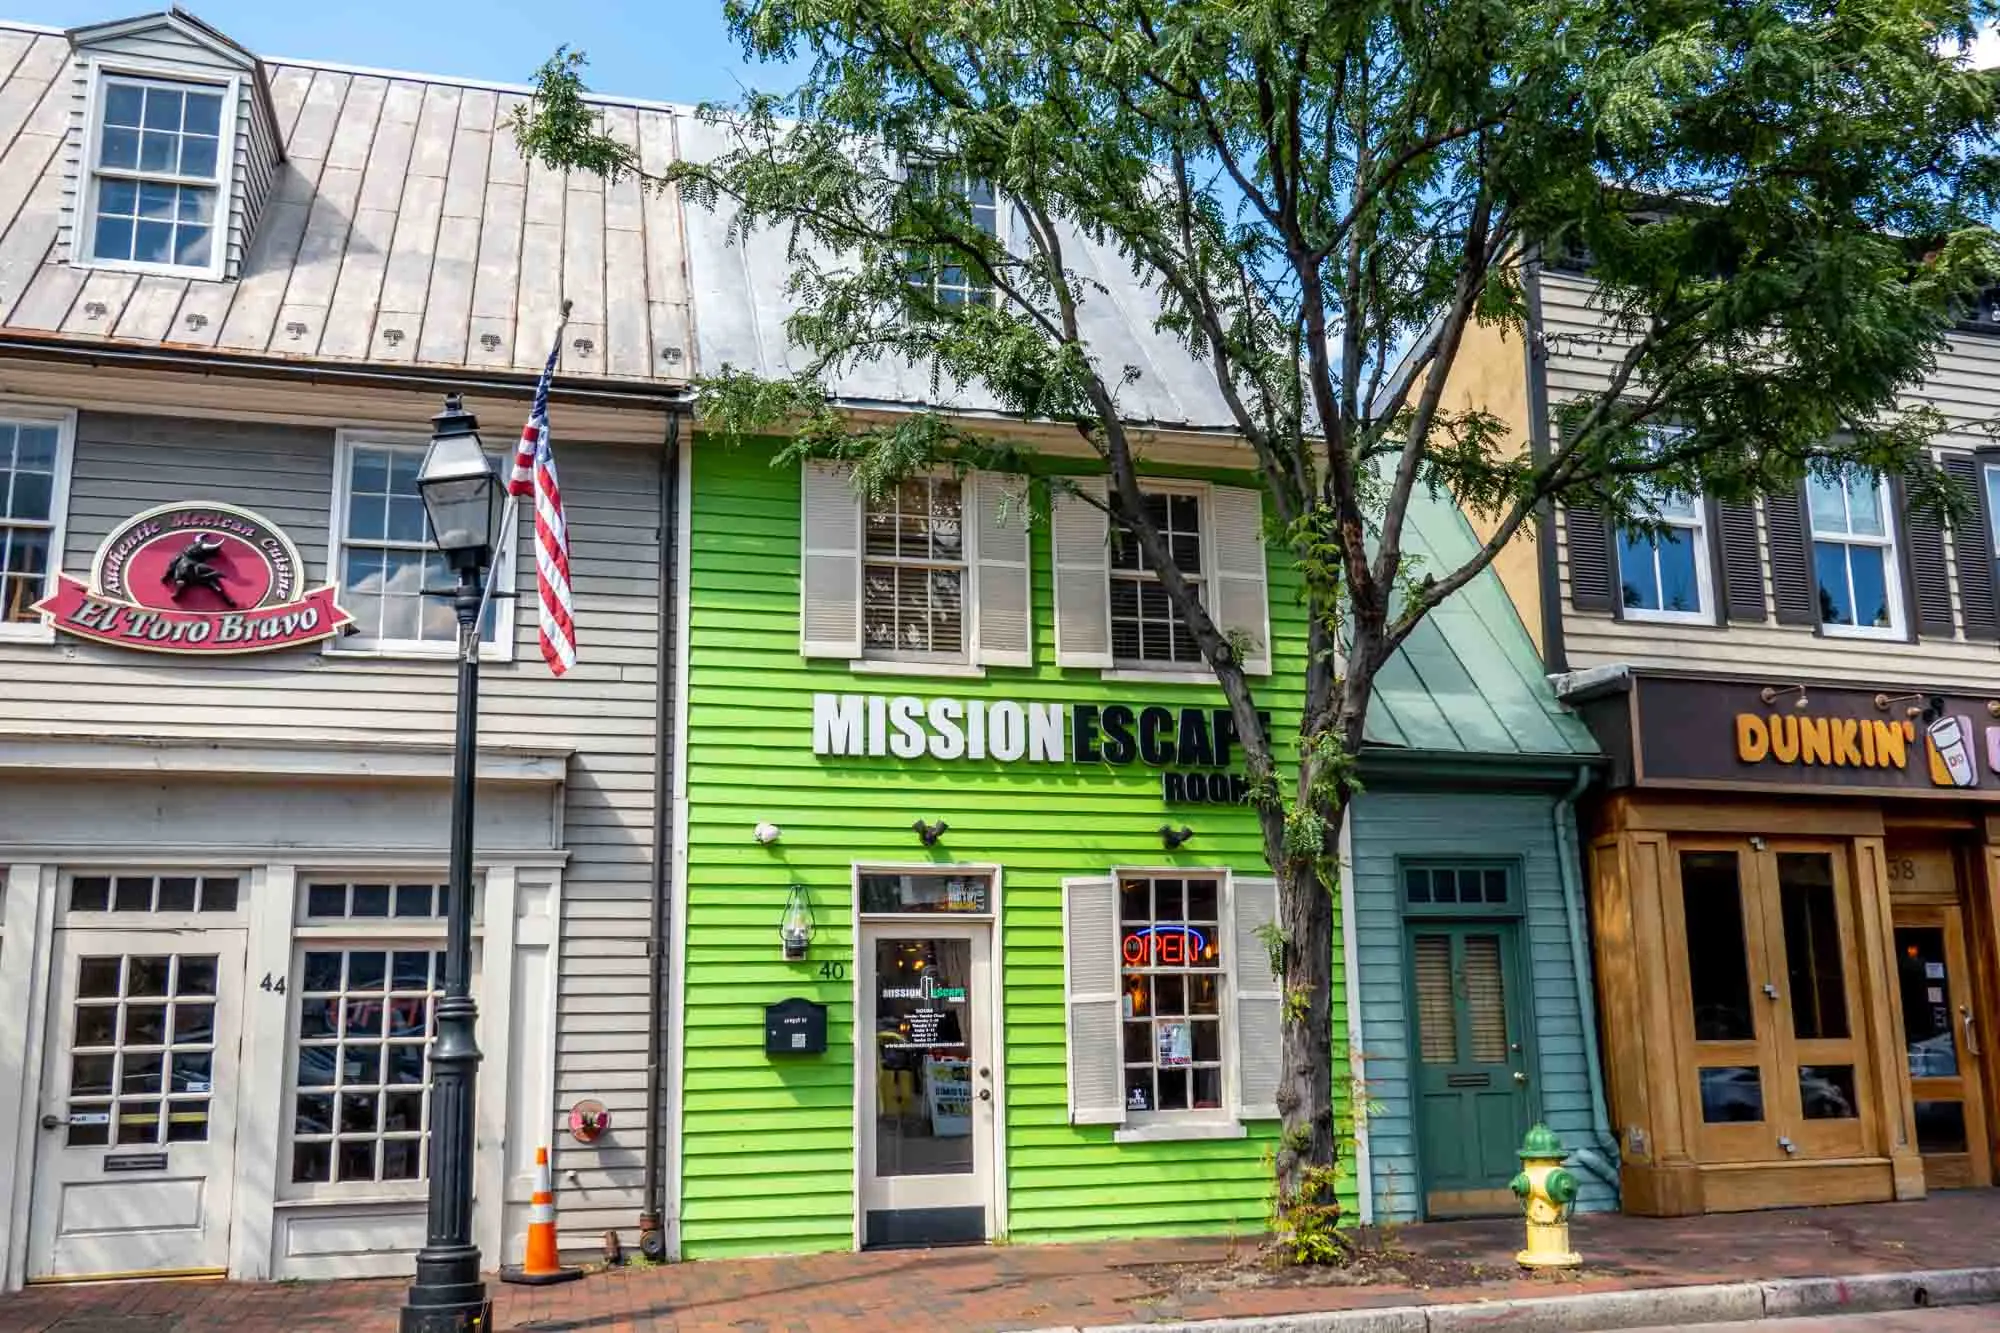 Bright green building with a black and white sign for "Mission Escape Room."